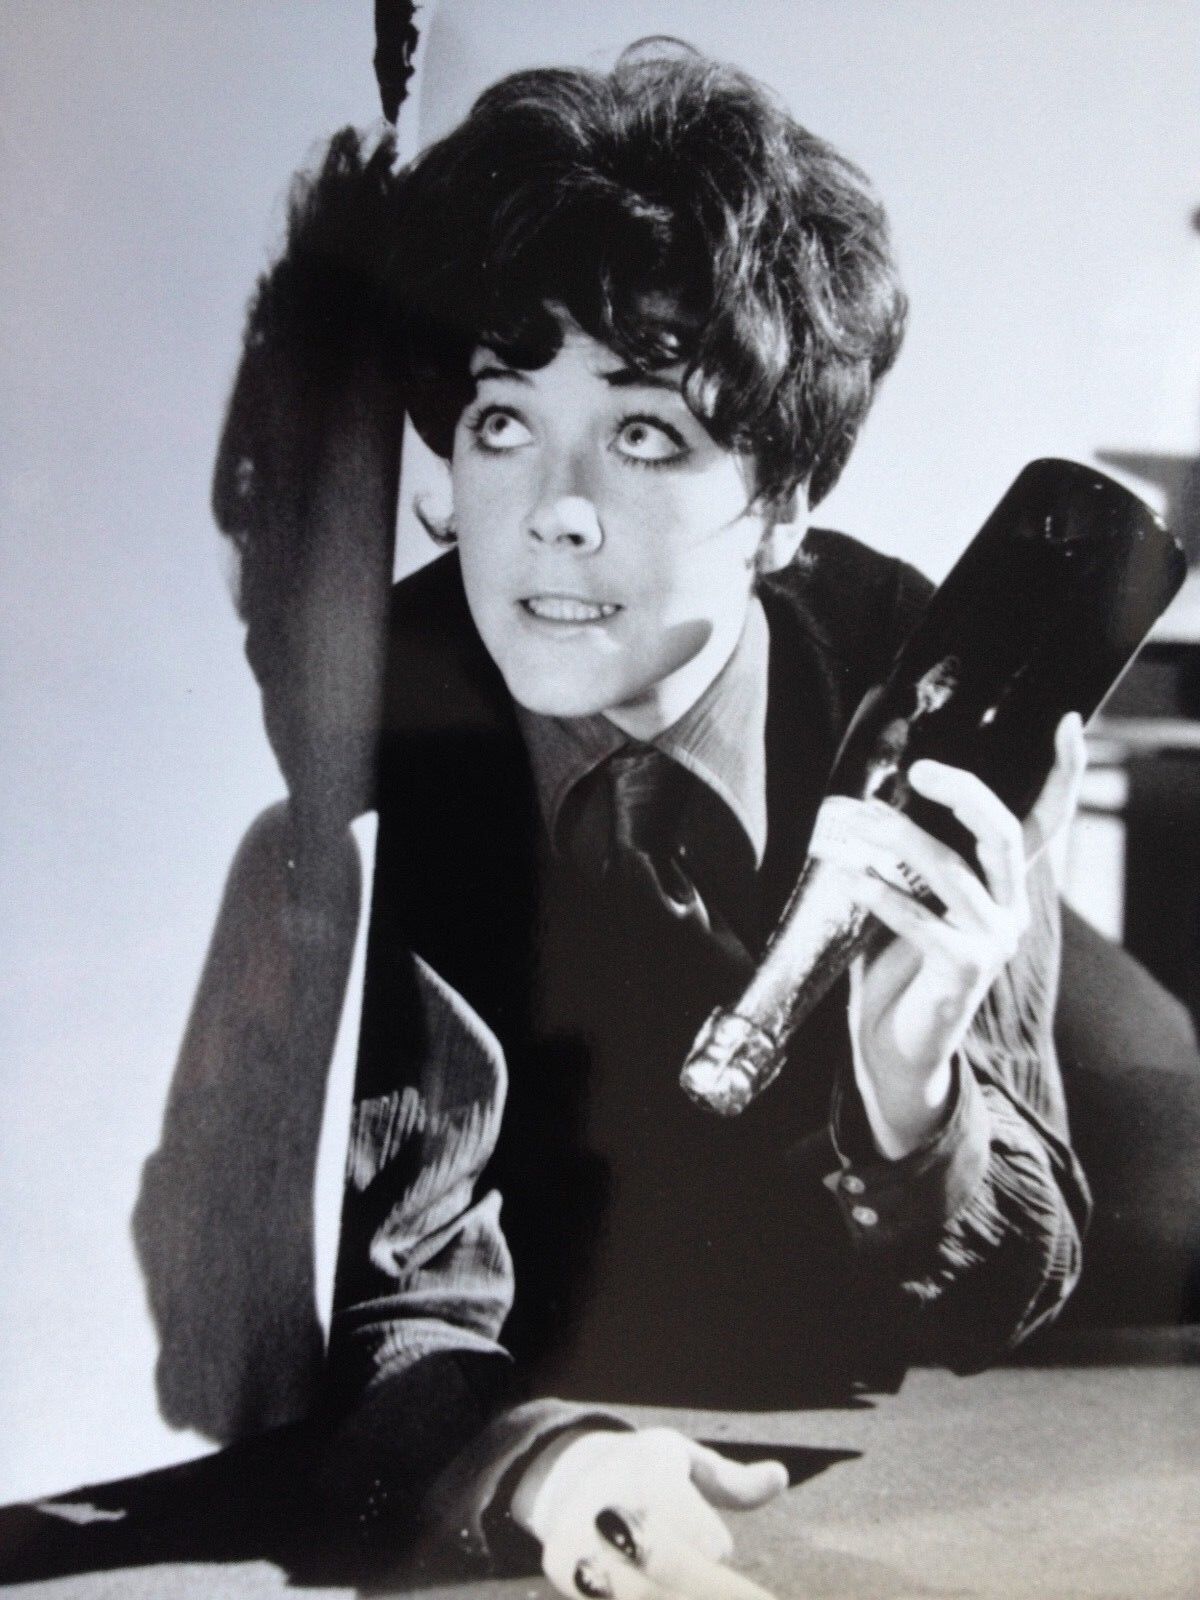 LINDA THORSON ( 29 ) - THE AVENGERS ACTRESS - BRILLIANT UNSIGNED B/W Photo Poster painting